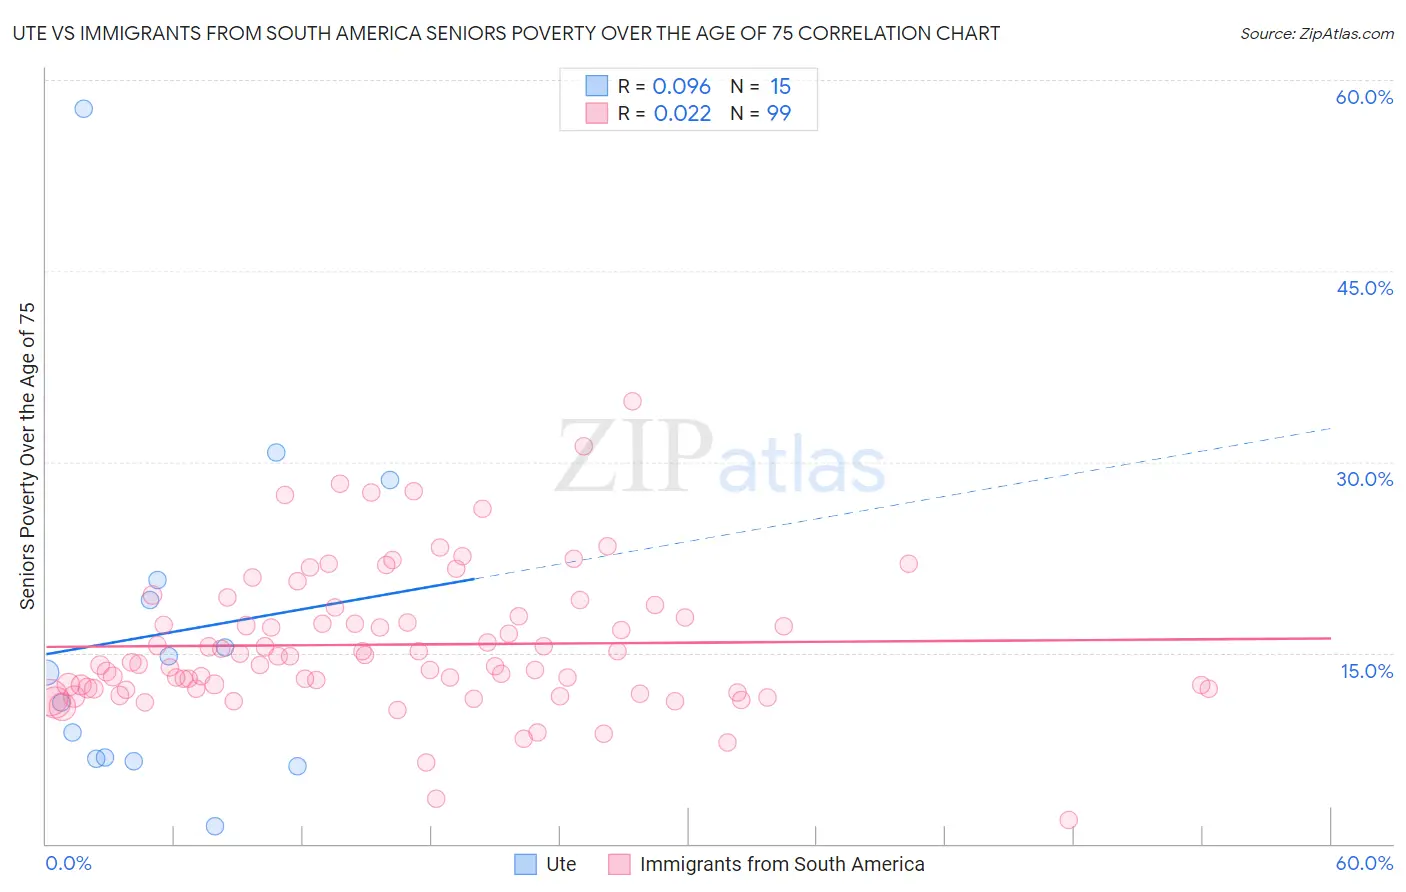 Ute vs Immigrants from South America Seniors Poverty Over the Age of 75